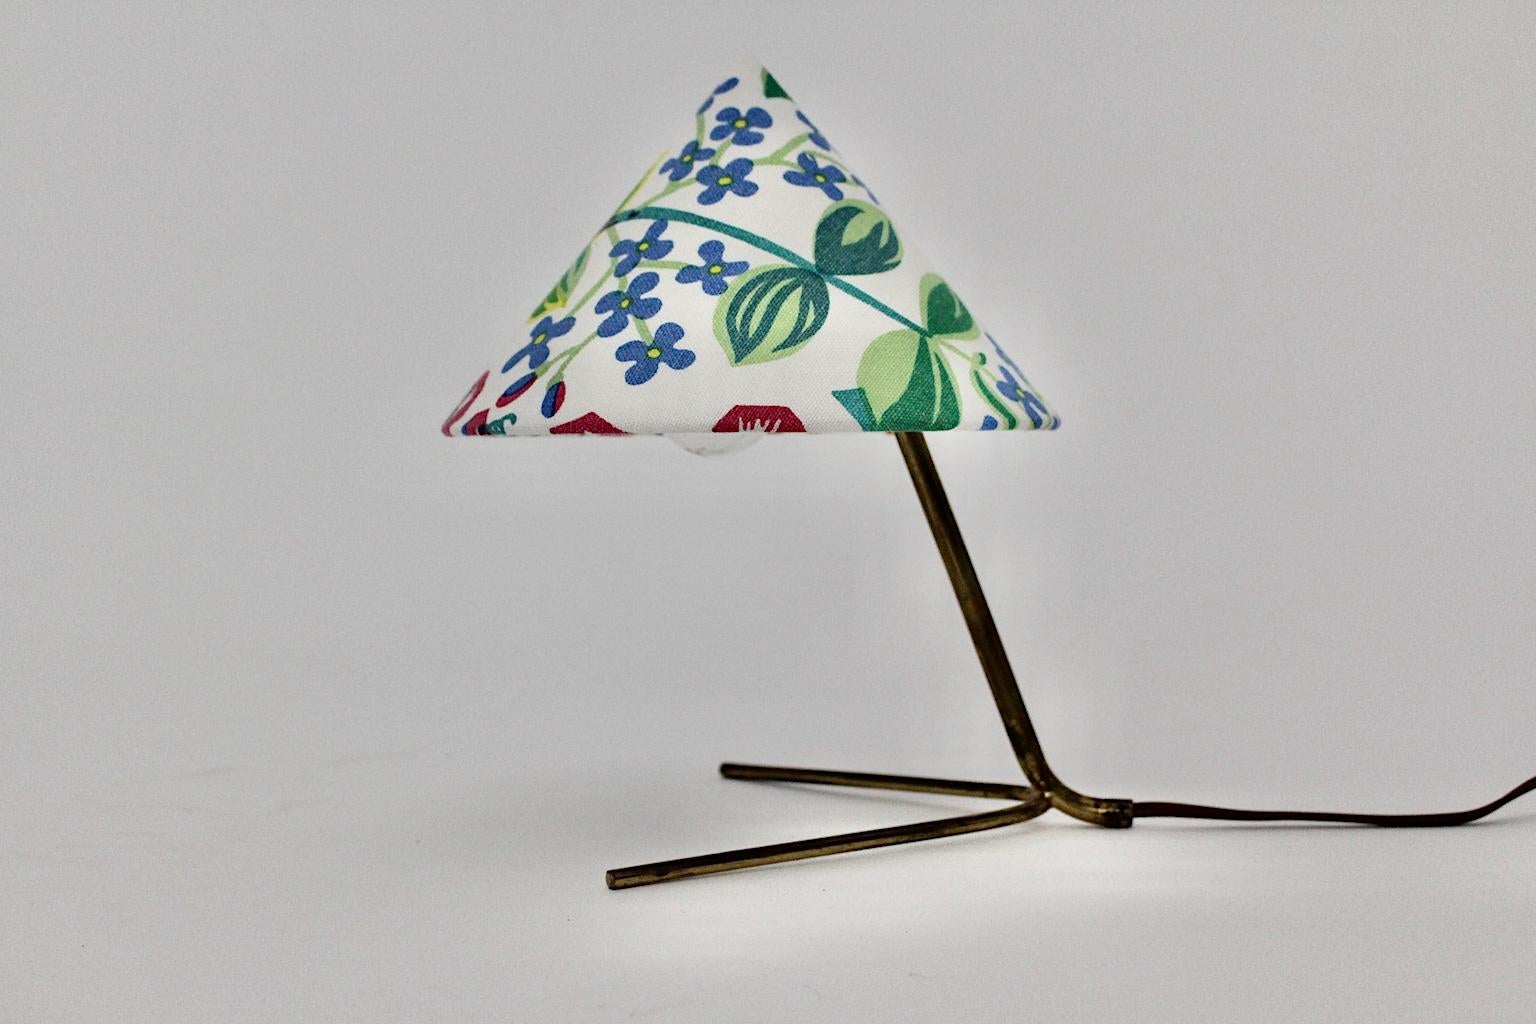 Mid-Century Modern vintage brass table lamp, which was designed and manufactured by Kalmar, 1950s, Austria. While the base and the significant splayfoot was made out of brass tube and shows signs of age, the renewed lamp shade in its original shape